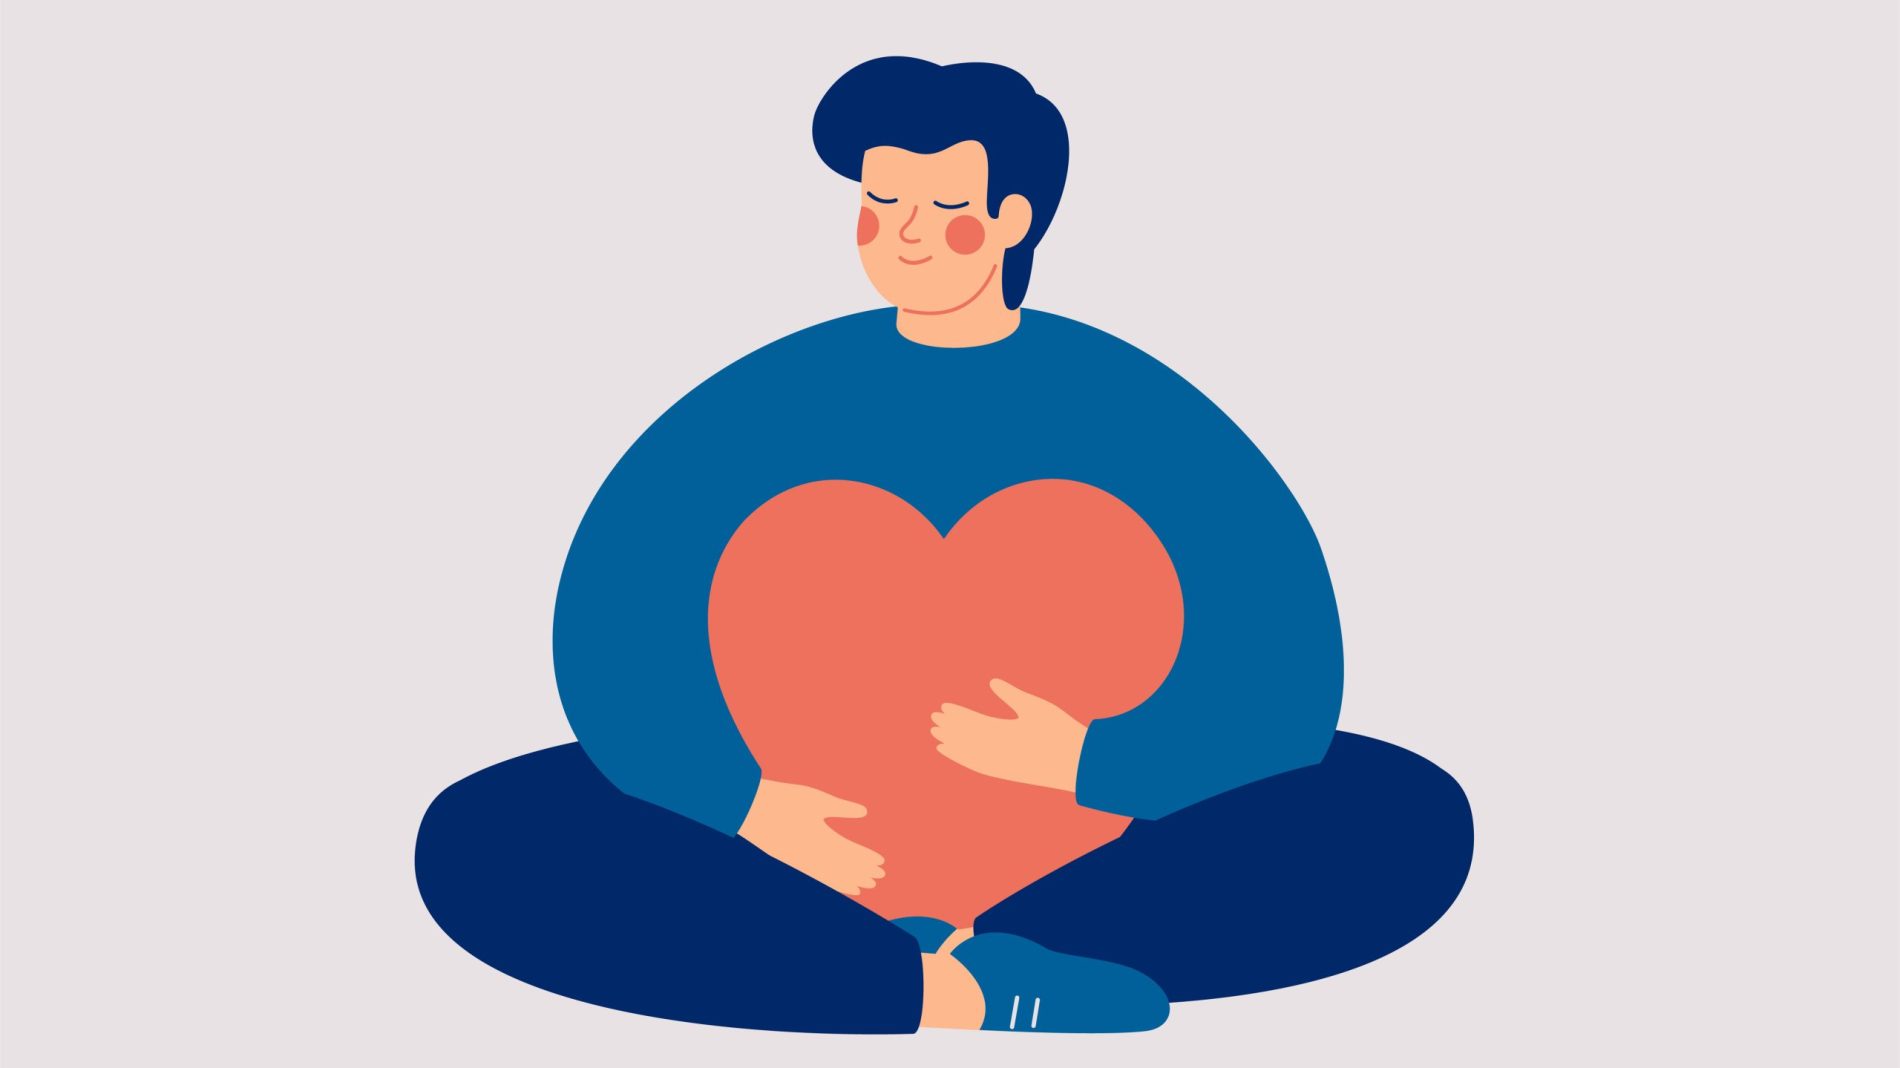 Young man embraces a big red heart with mindfulness and love. Smiling boy sits in lotus pose with closed eyes and enjoys his freedom and life. Body positive and mental health concept.